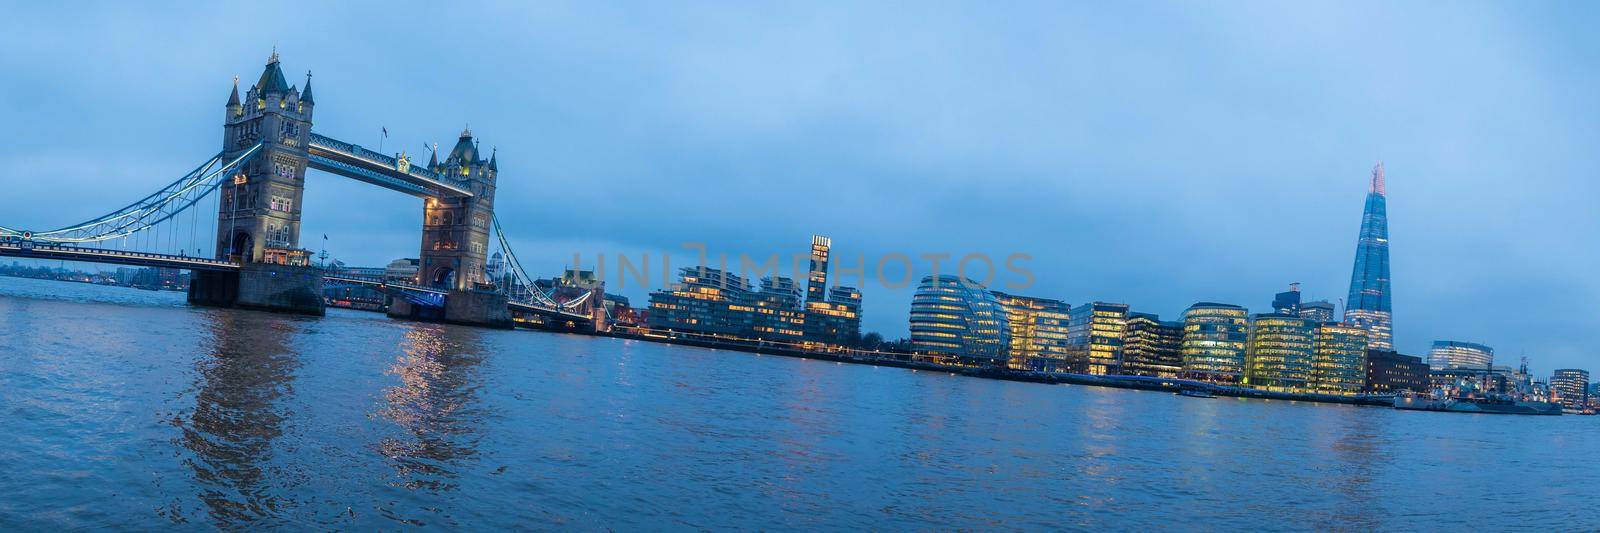 London, UK - January 26, 2017: Panorama of the iconic Tower Bridge connecting Londong with Southwark on the Thames River with the London city skyline in the background with view of the Shard